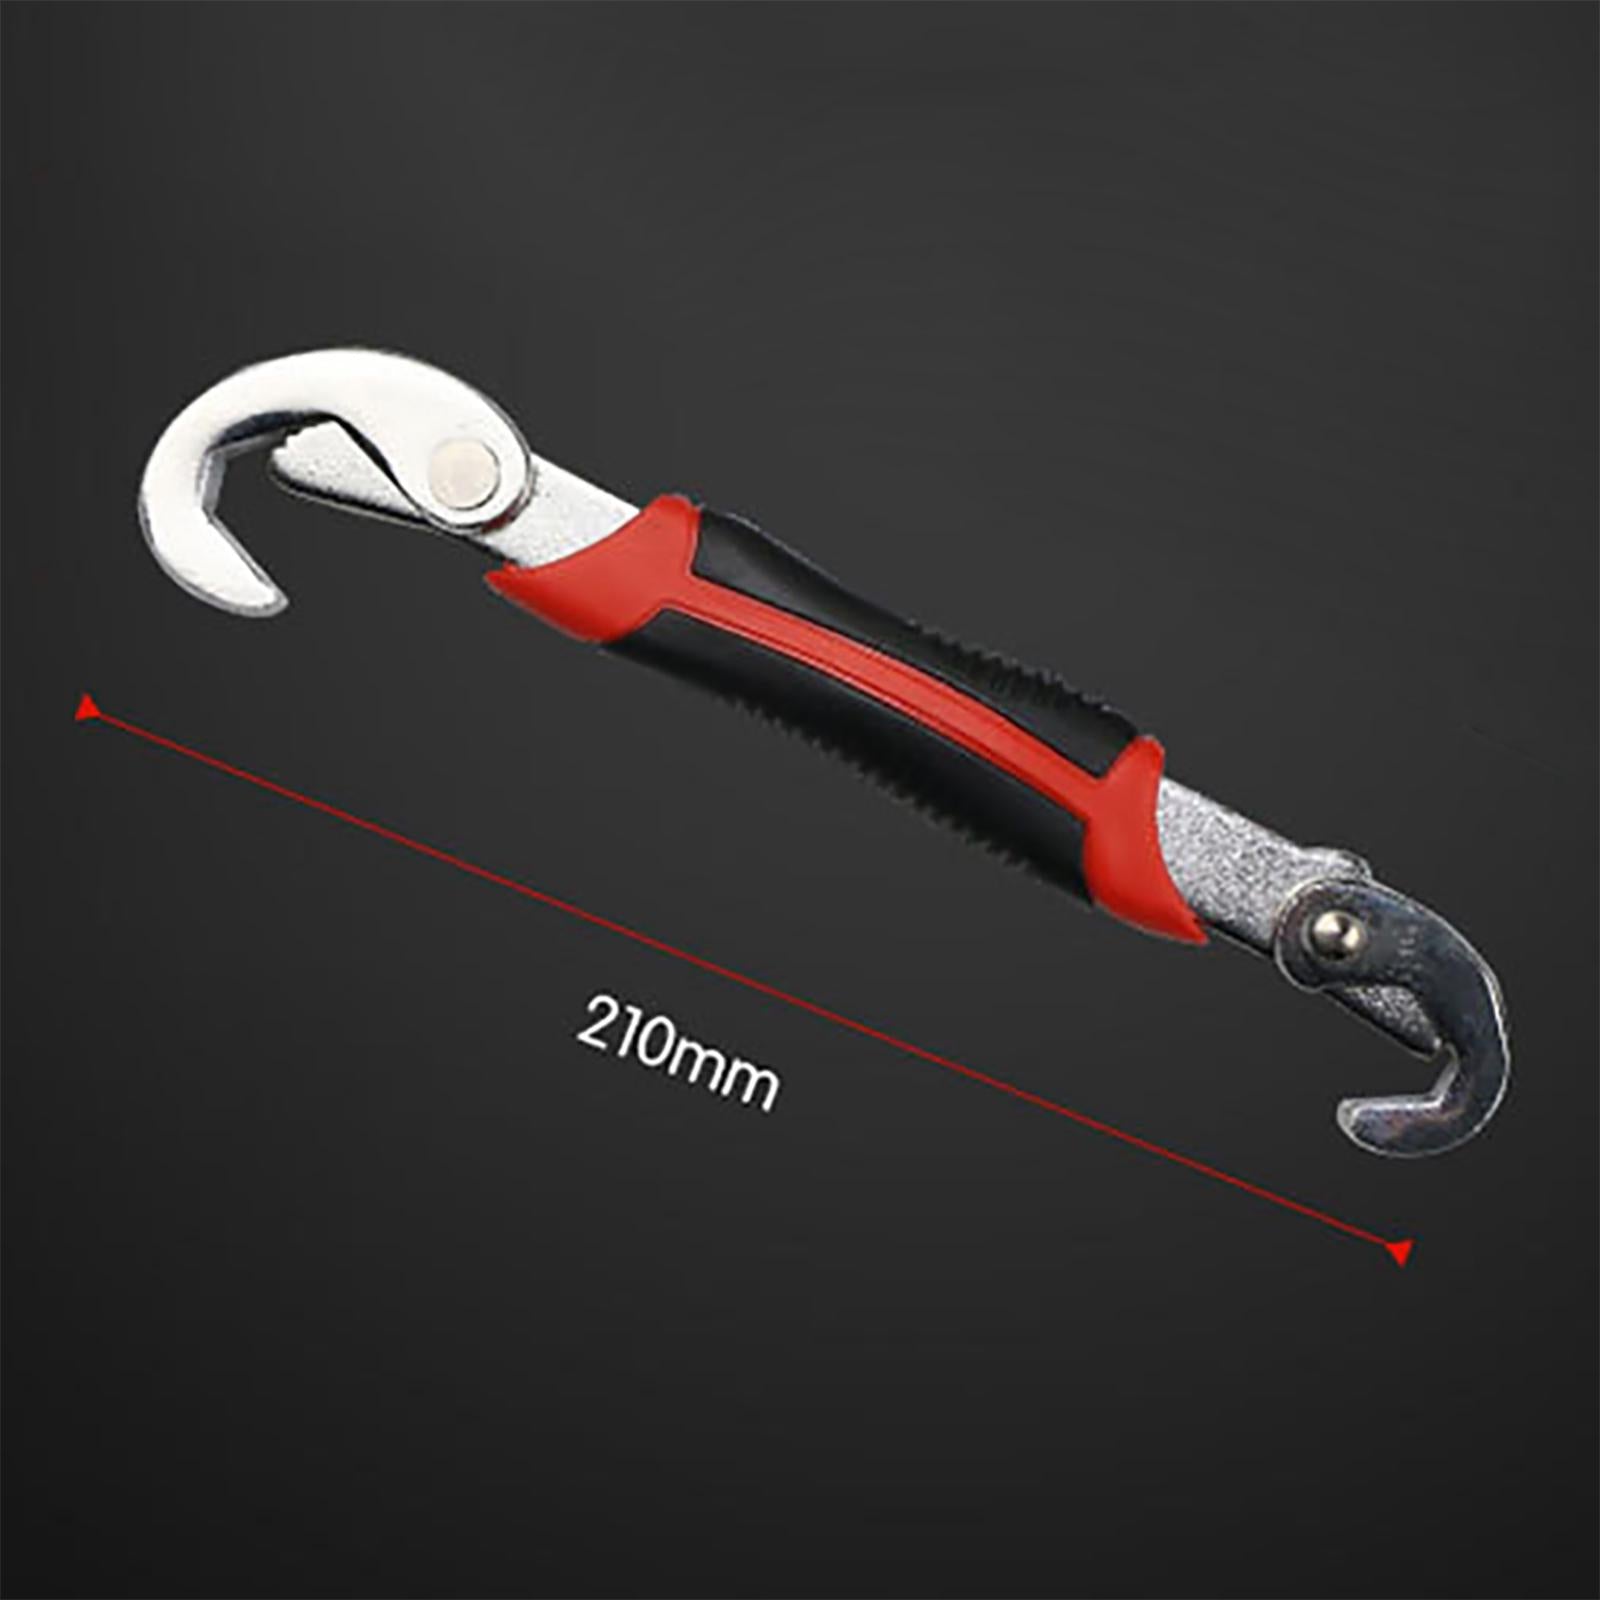 Universal Quick Snap Grip Wrench Repair Tool Steel for Home Kitchen Garden Small